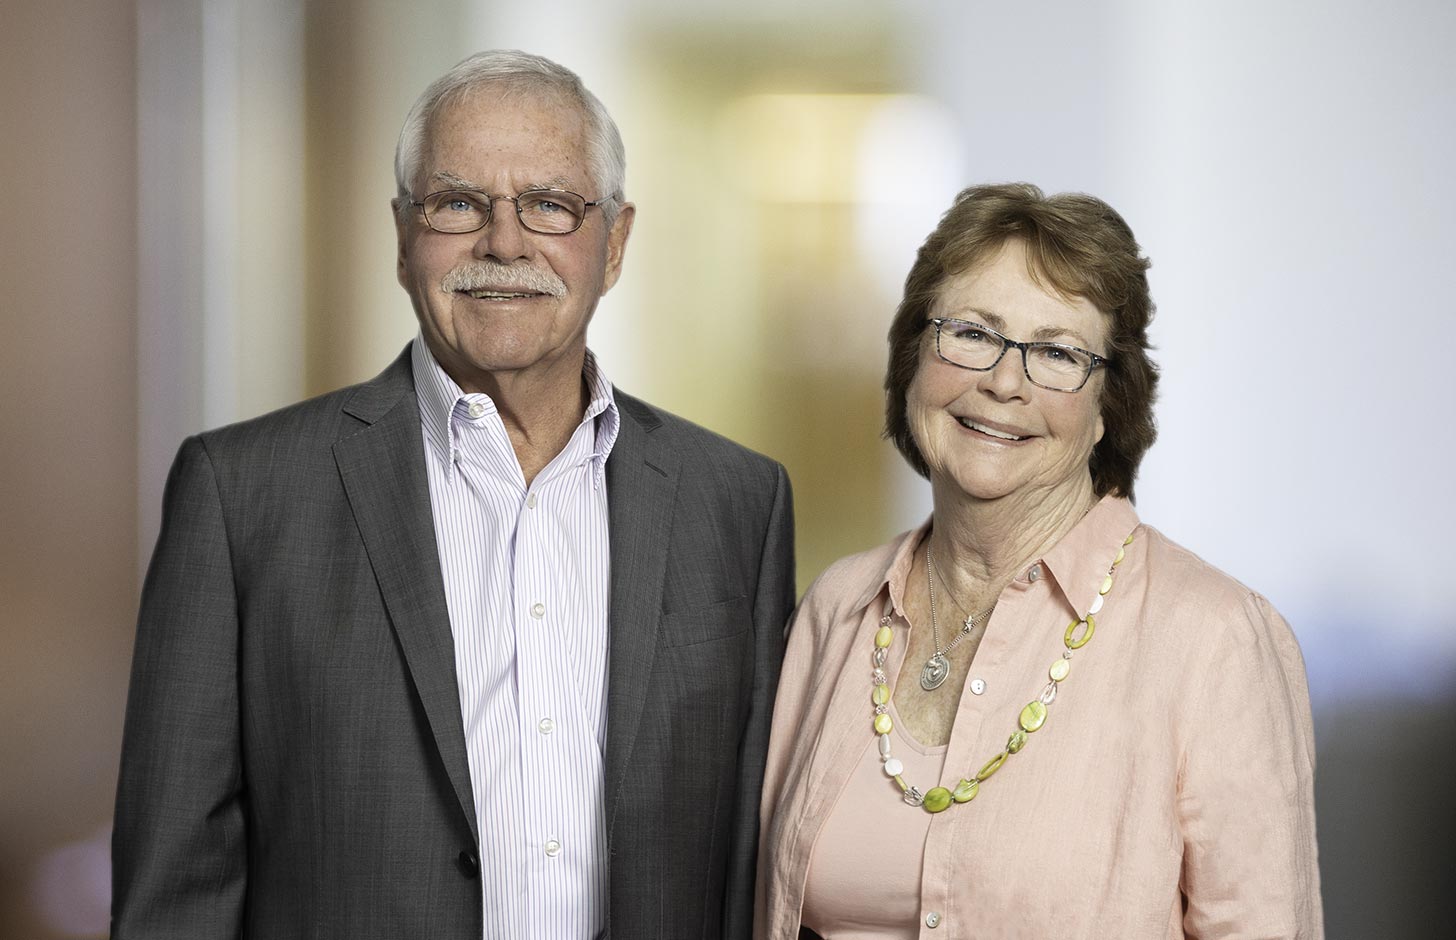 Deb and Joe Annese, founders